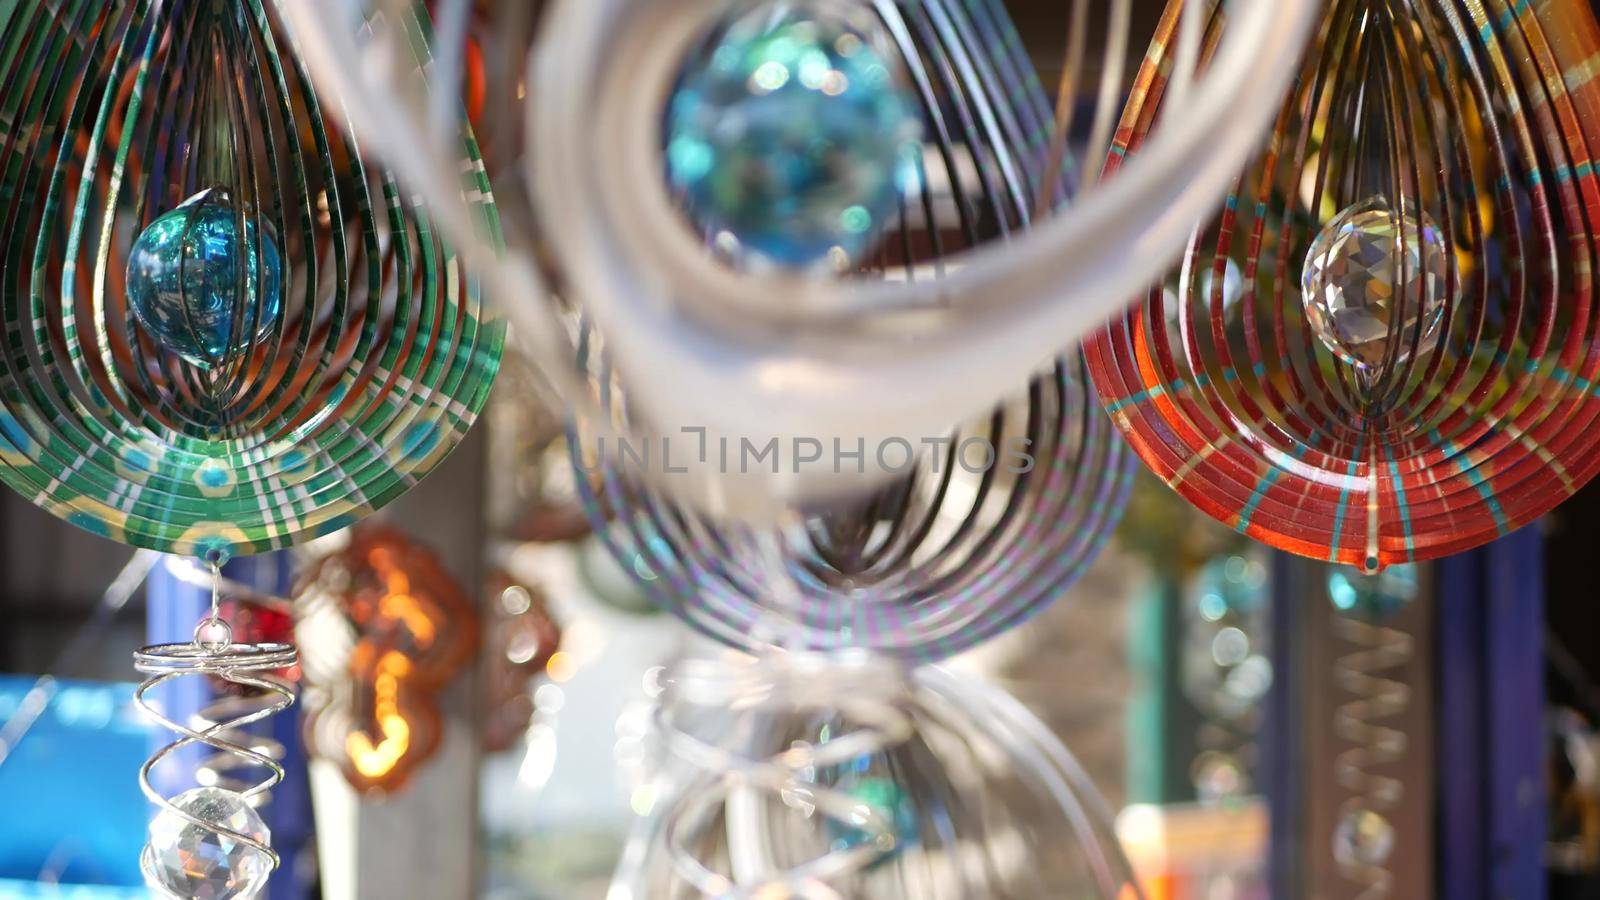 Colorful geometric metallic wind spinner, garden hypnotic surreal decoration, California USA. 3D kinetic rotating iridescent magnetic multi colored air spiral. Shimmering mesmerising optical illusion.